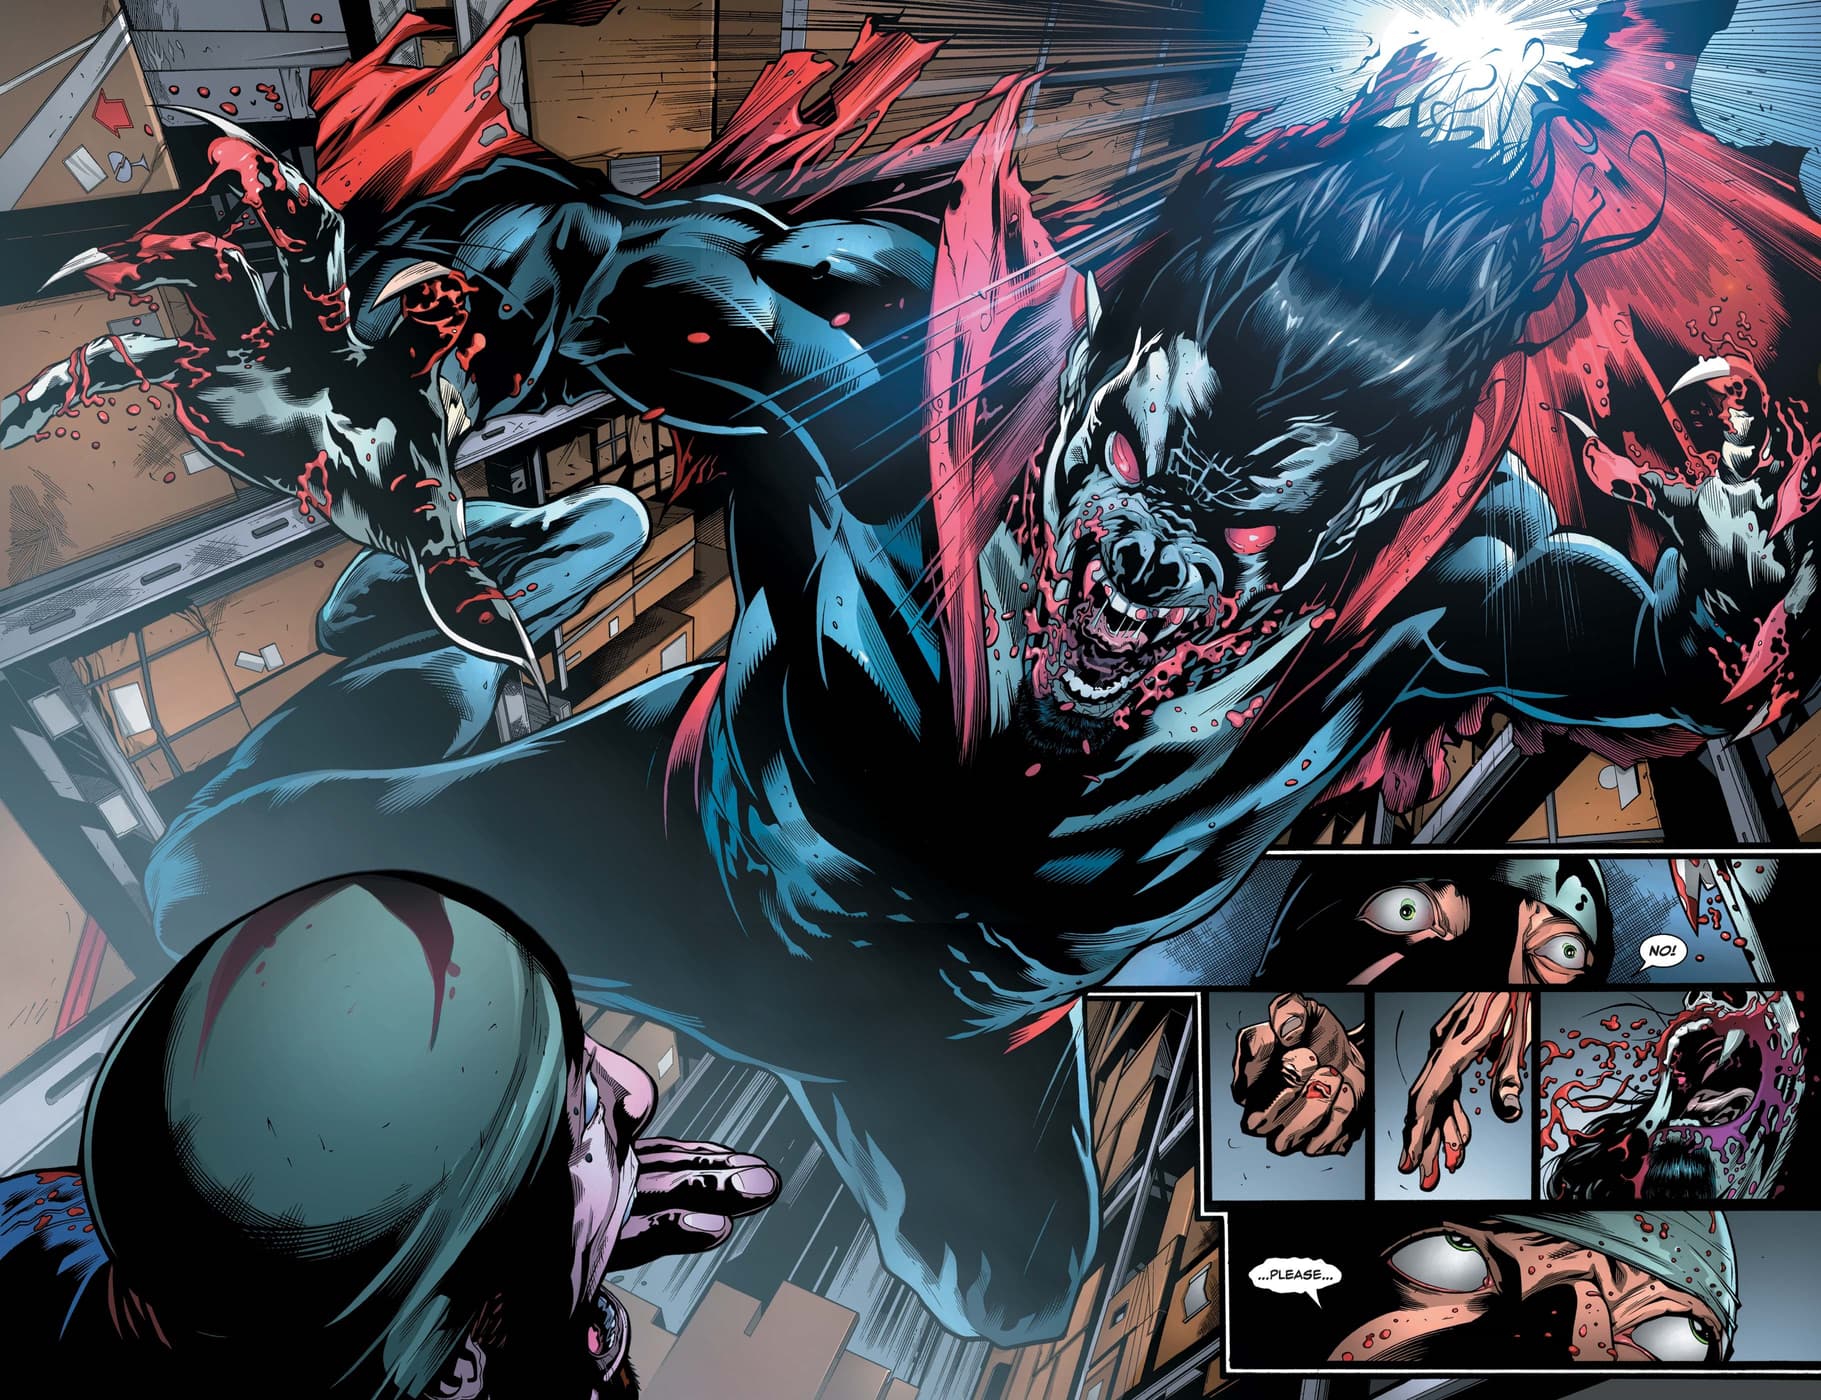 Morbius lunges on his prey.